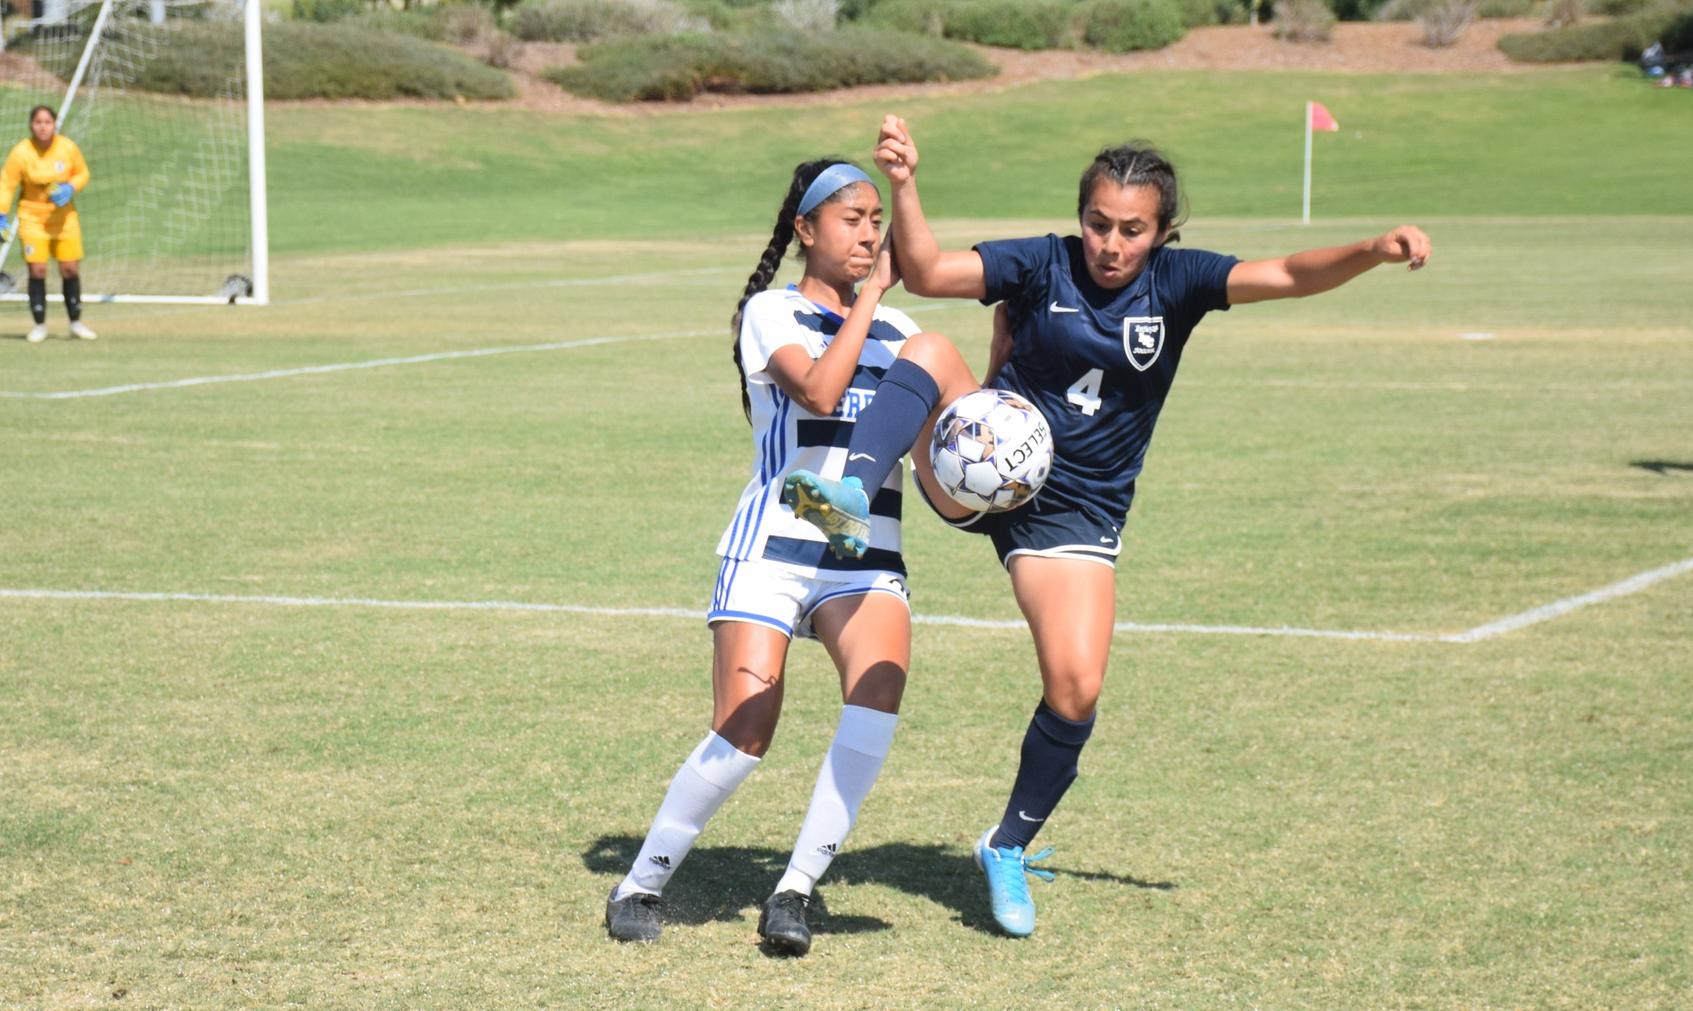 Women's soccer team has its chances, but can't get by Cerritos